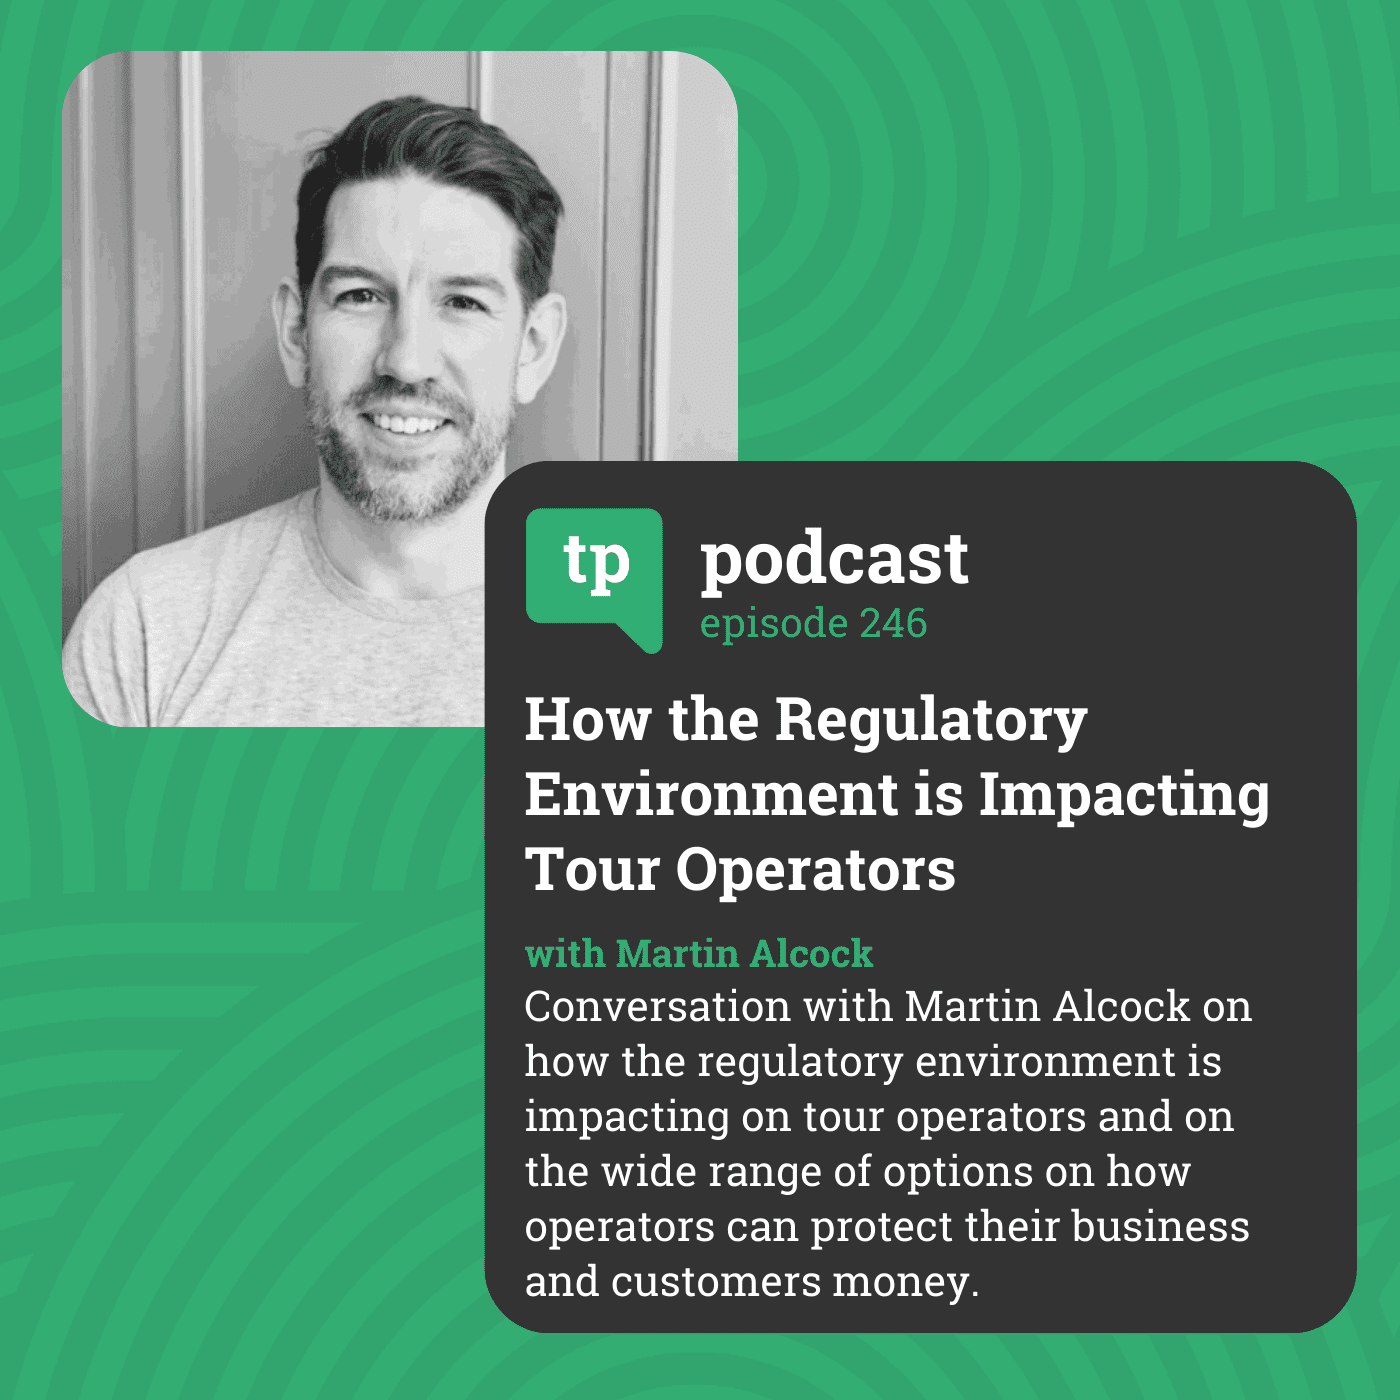 How the Regulatory Environment is Impacting Tour Operators - with Martin Alcock